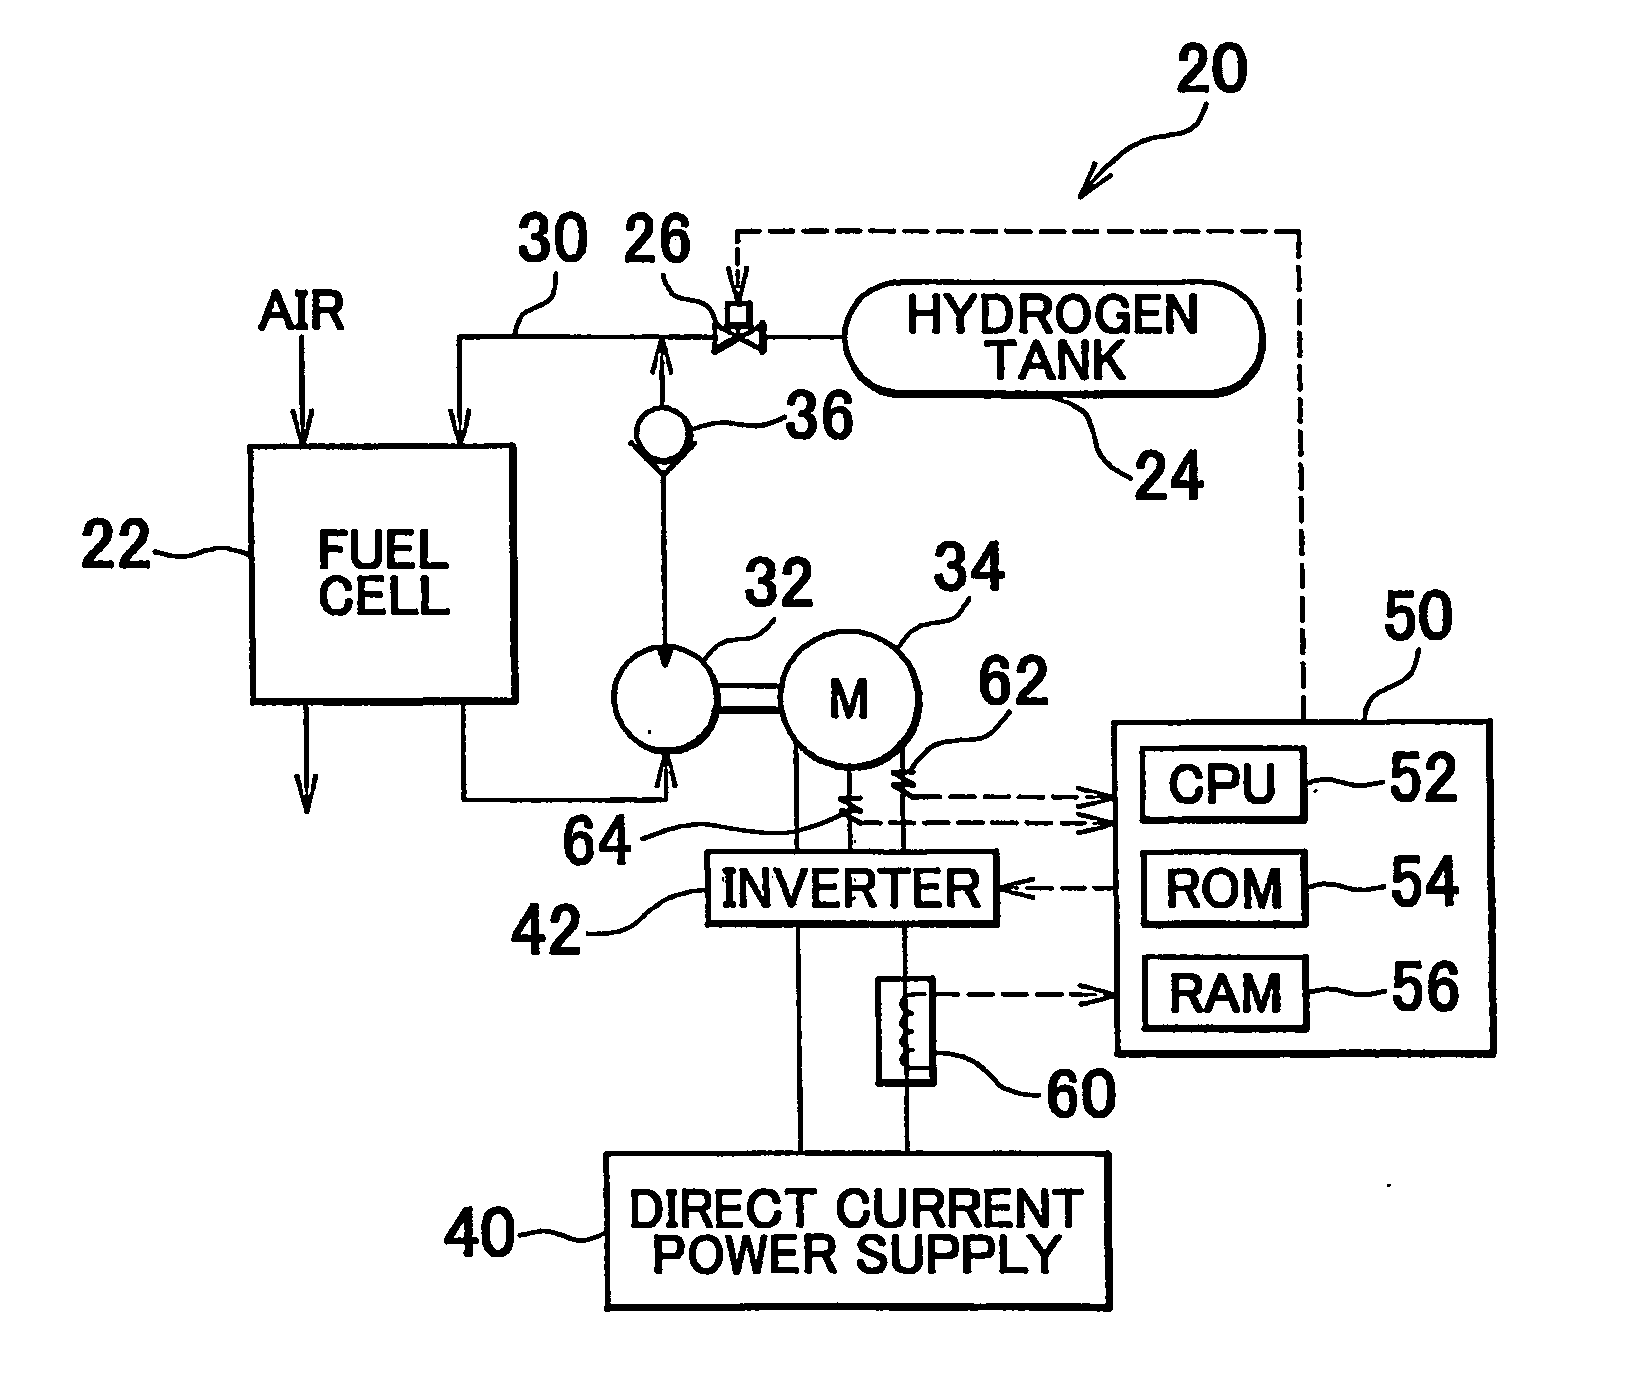 Hydrogen operated power system